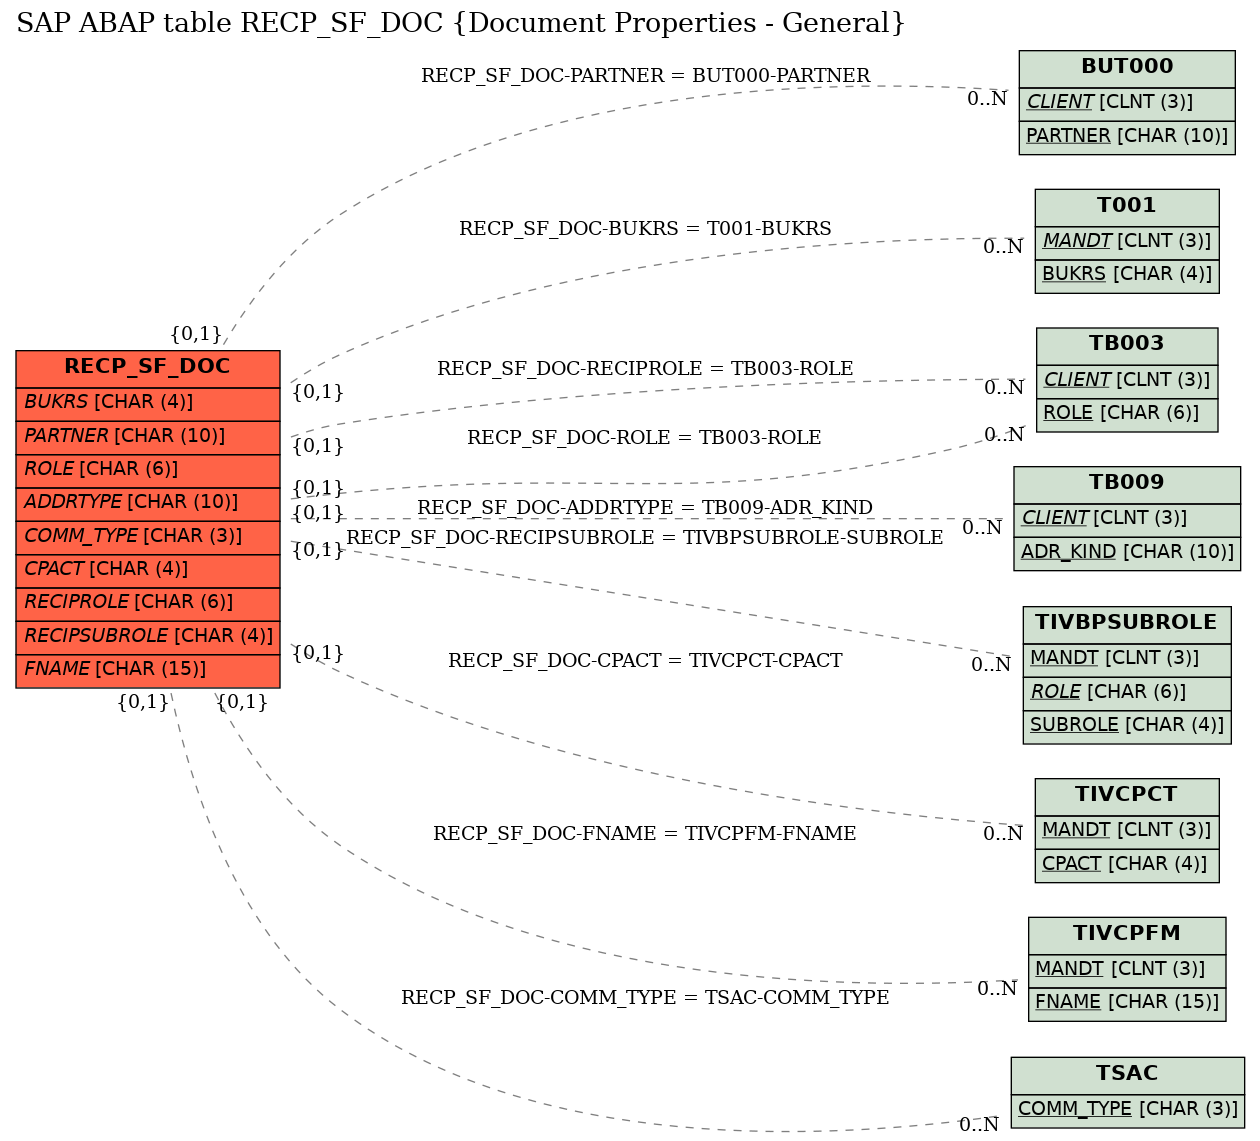 E-R Diagram for table RECP_SF_DOC (Document Properties - General)